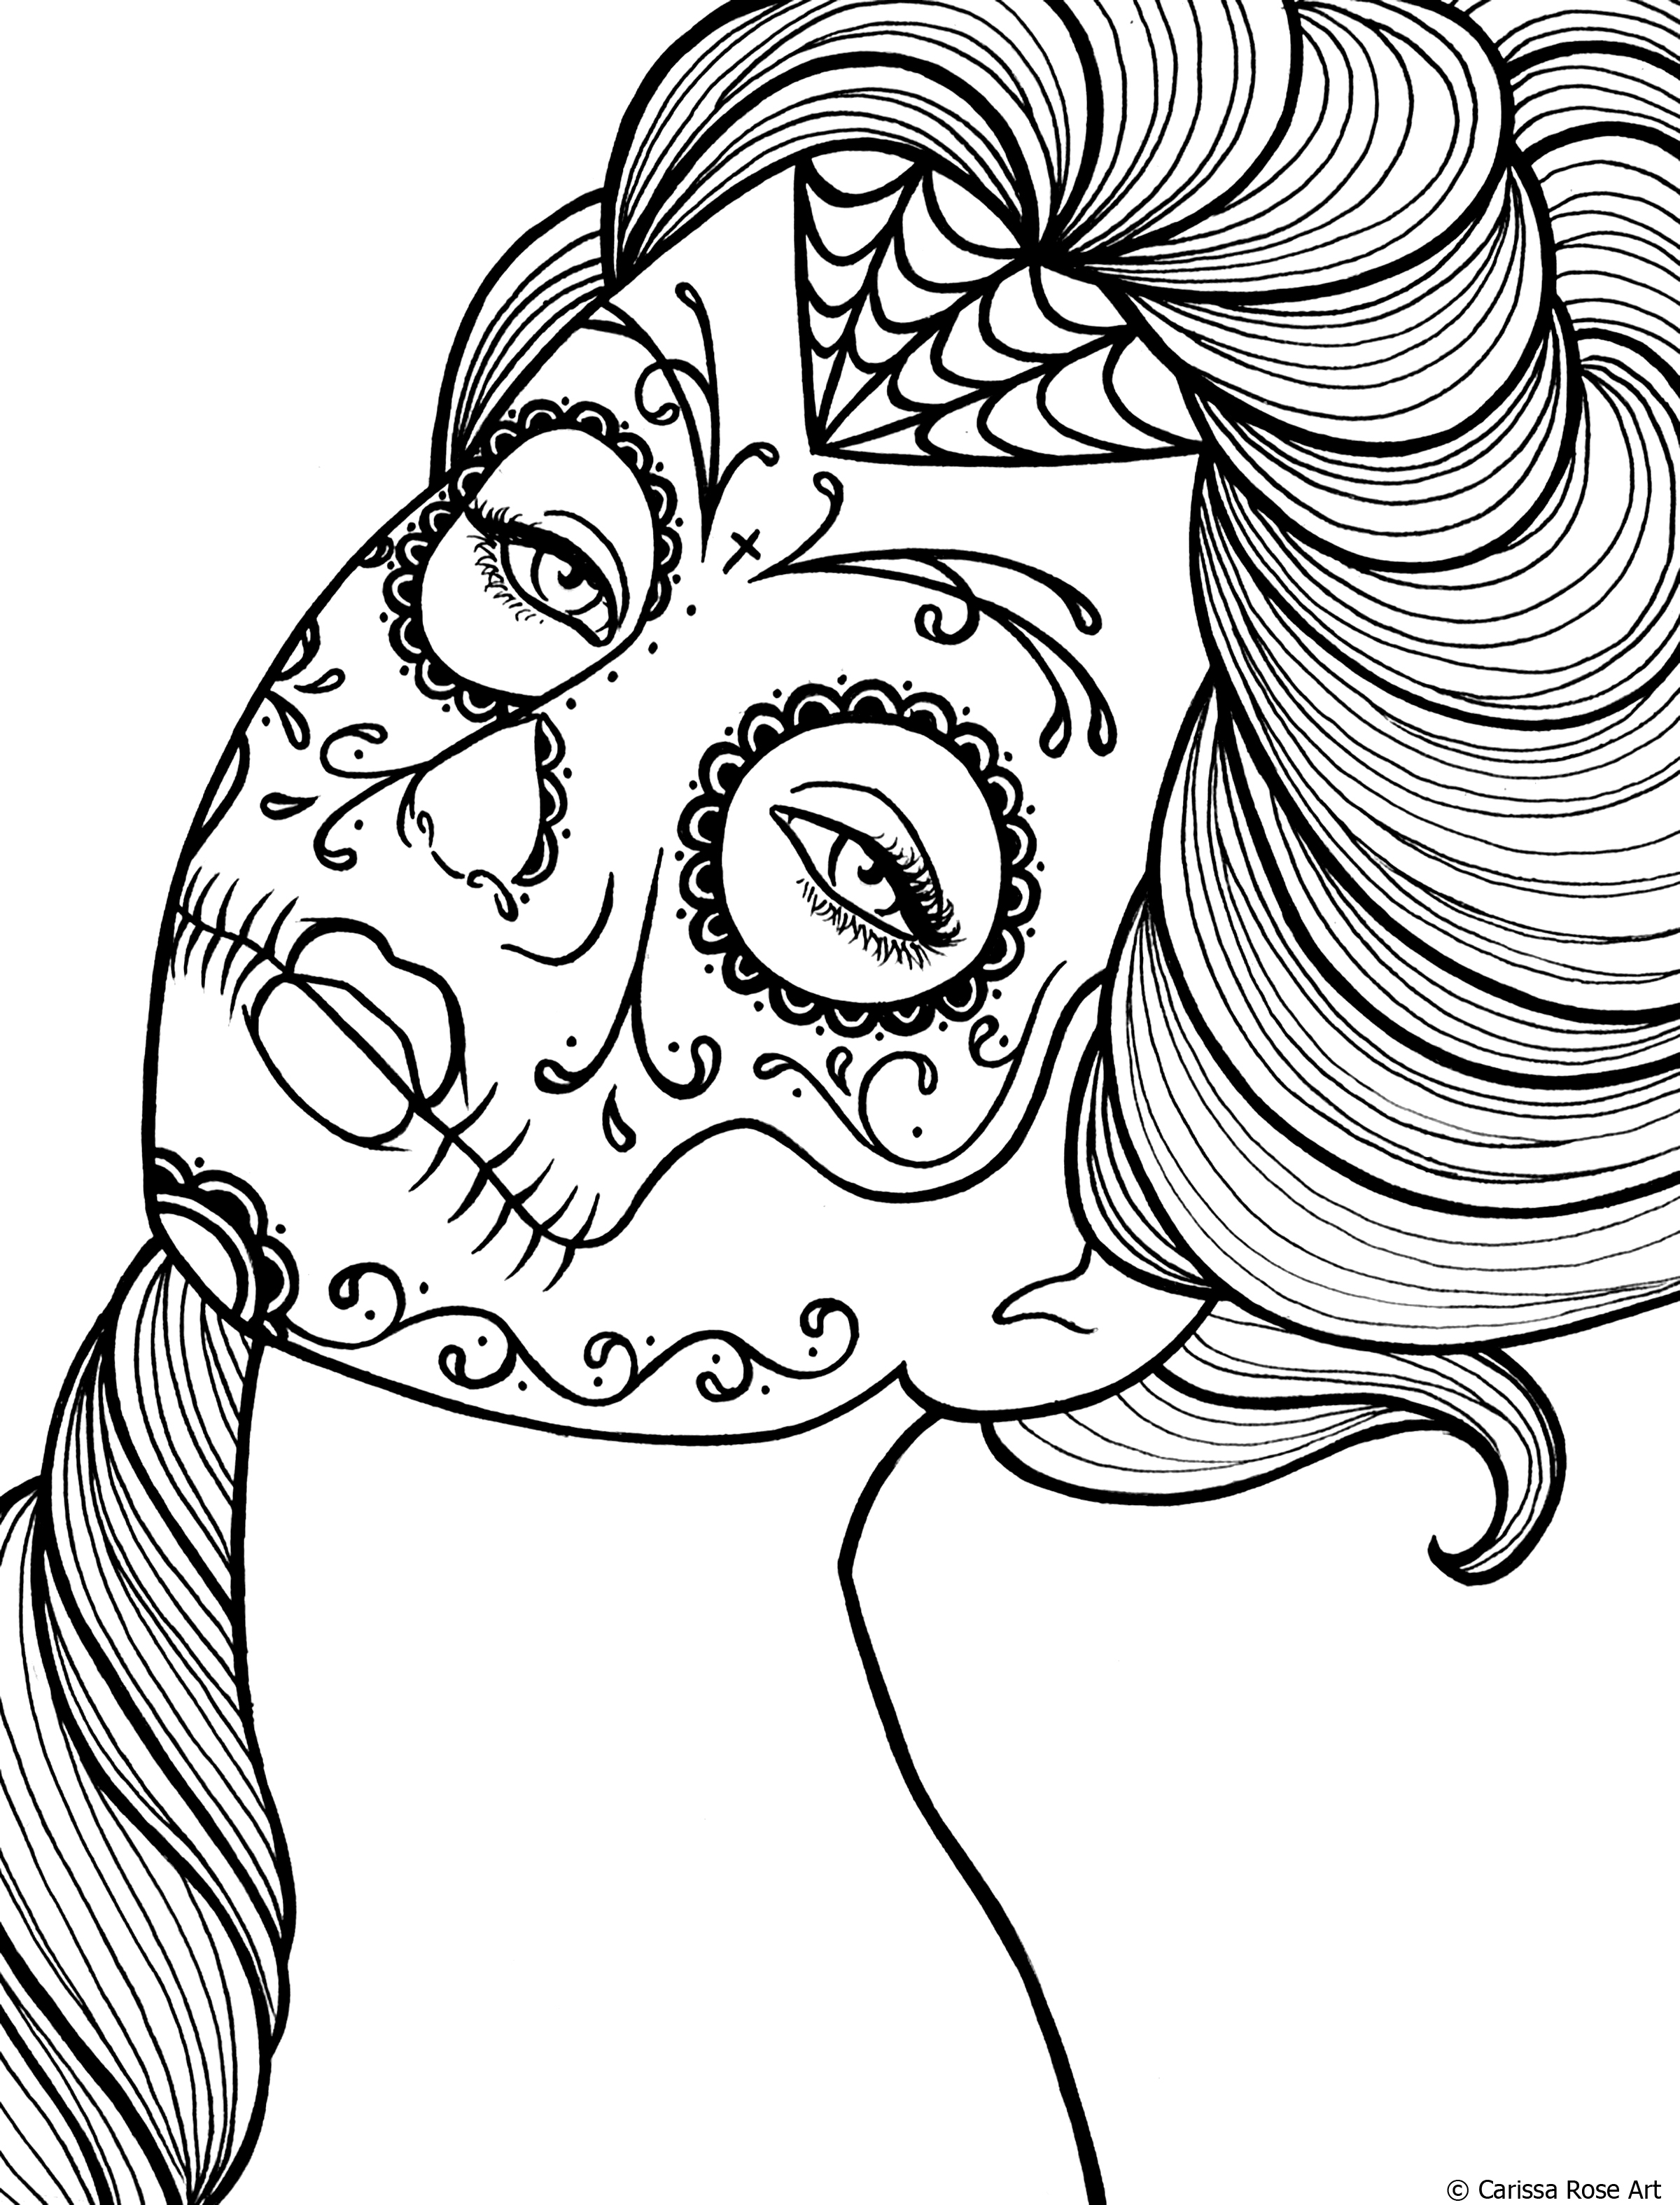 kbrguru-free-printable-day-of-the-dead-coloring-pages